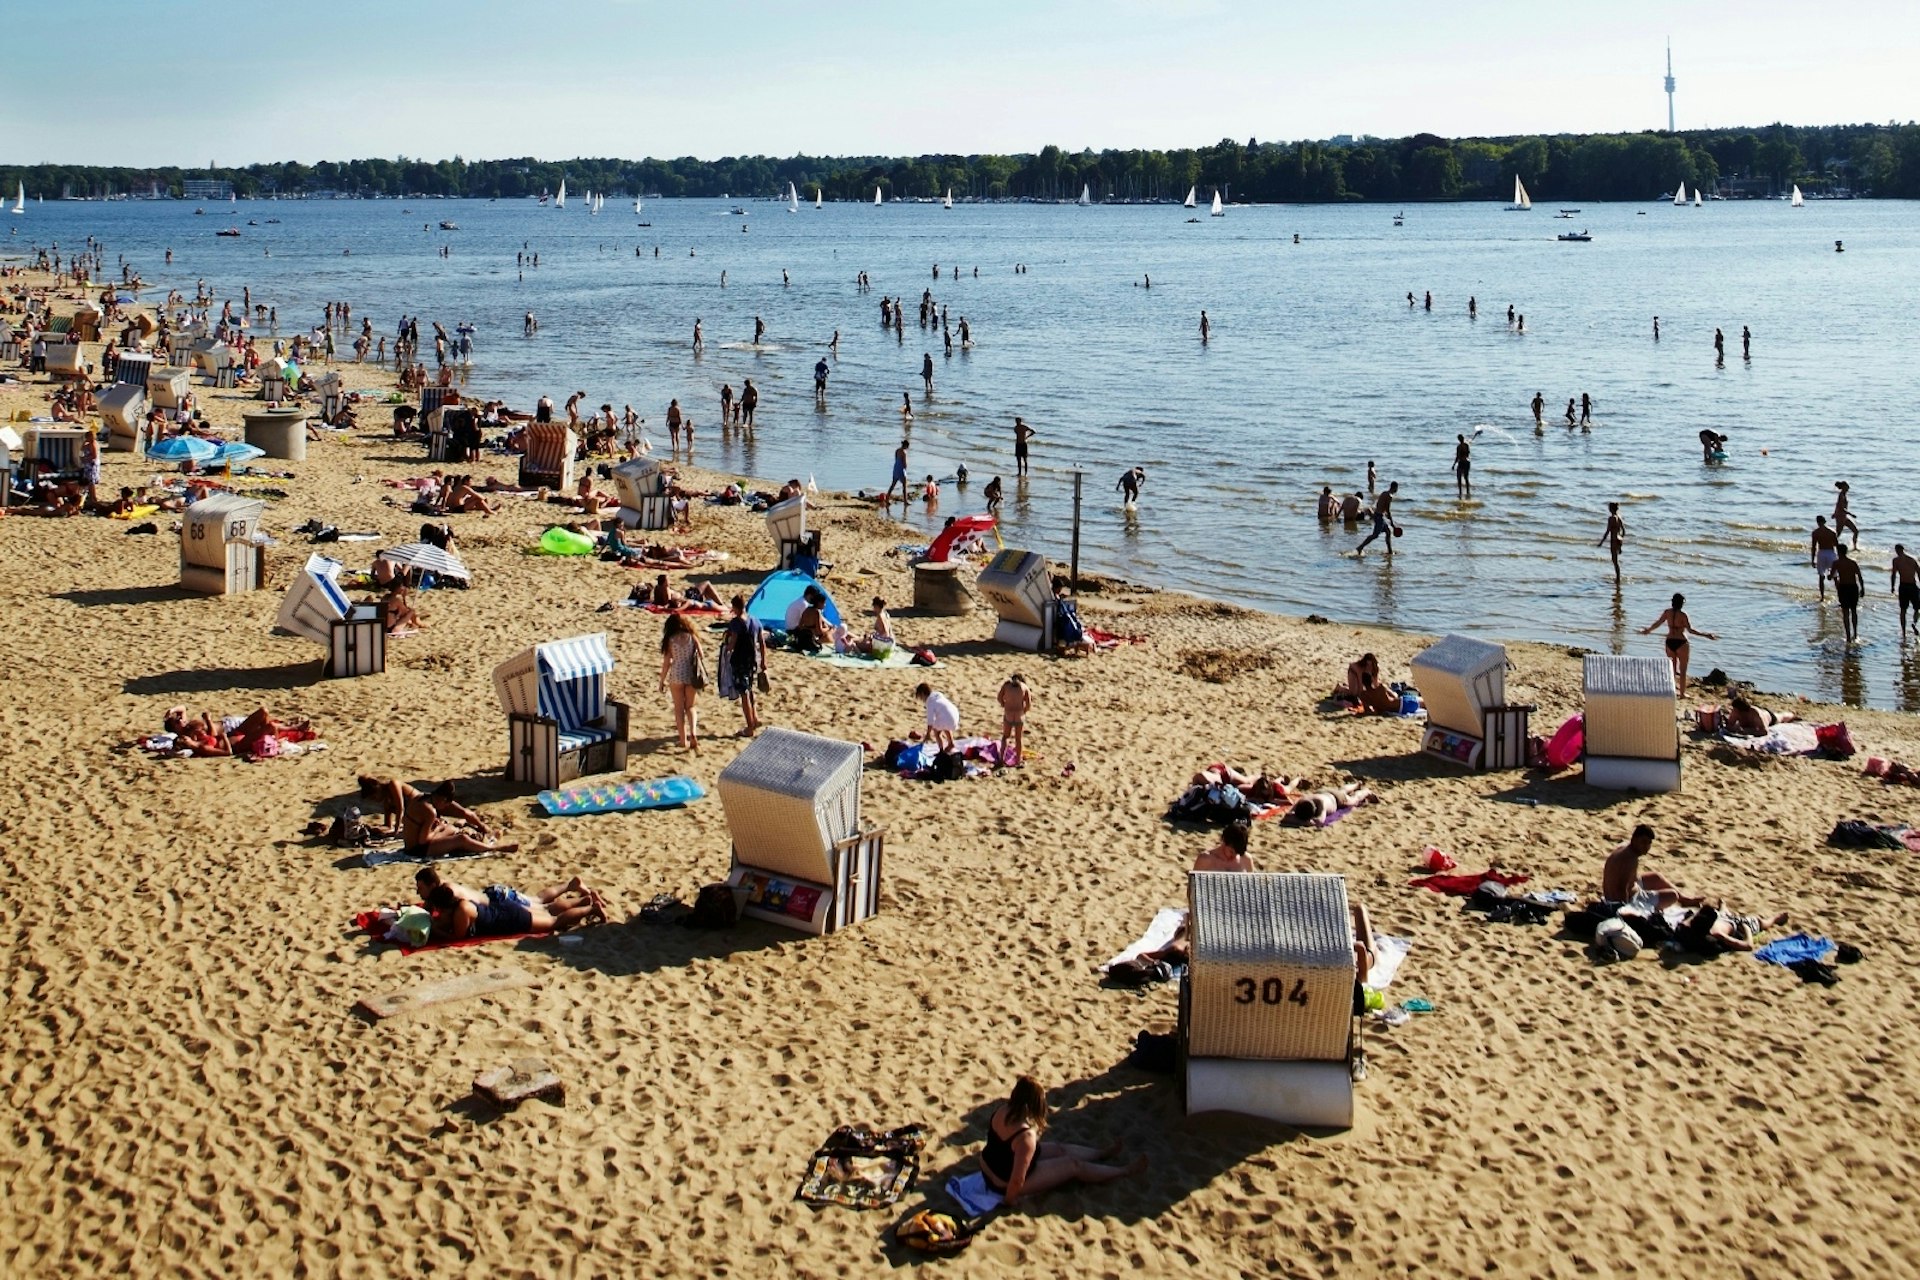 A sandy beach by a lake. People are lying on the beach and playing in the water.